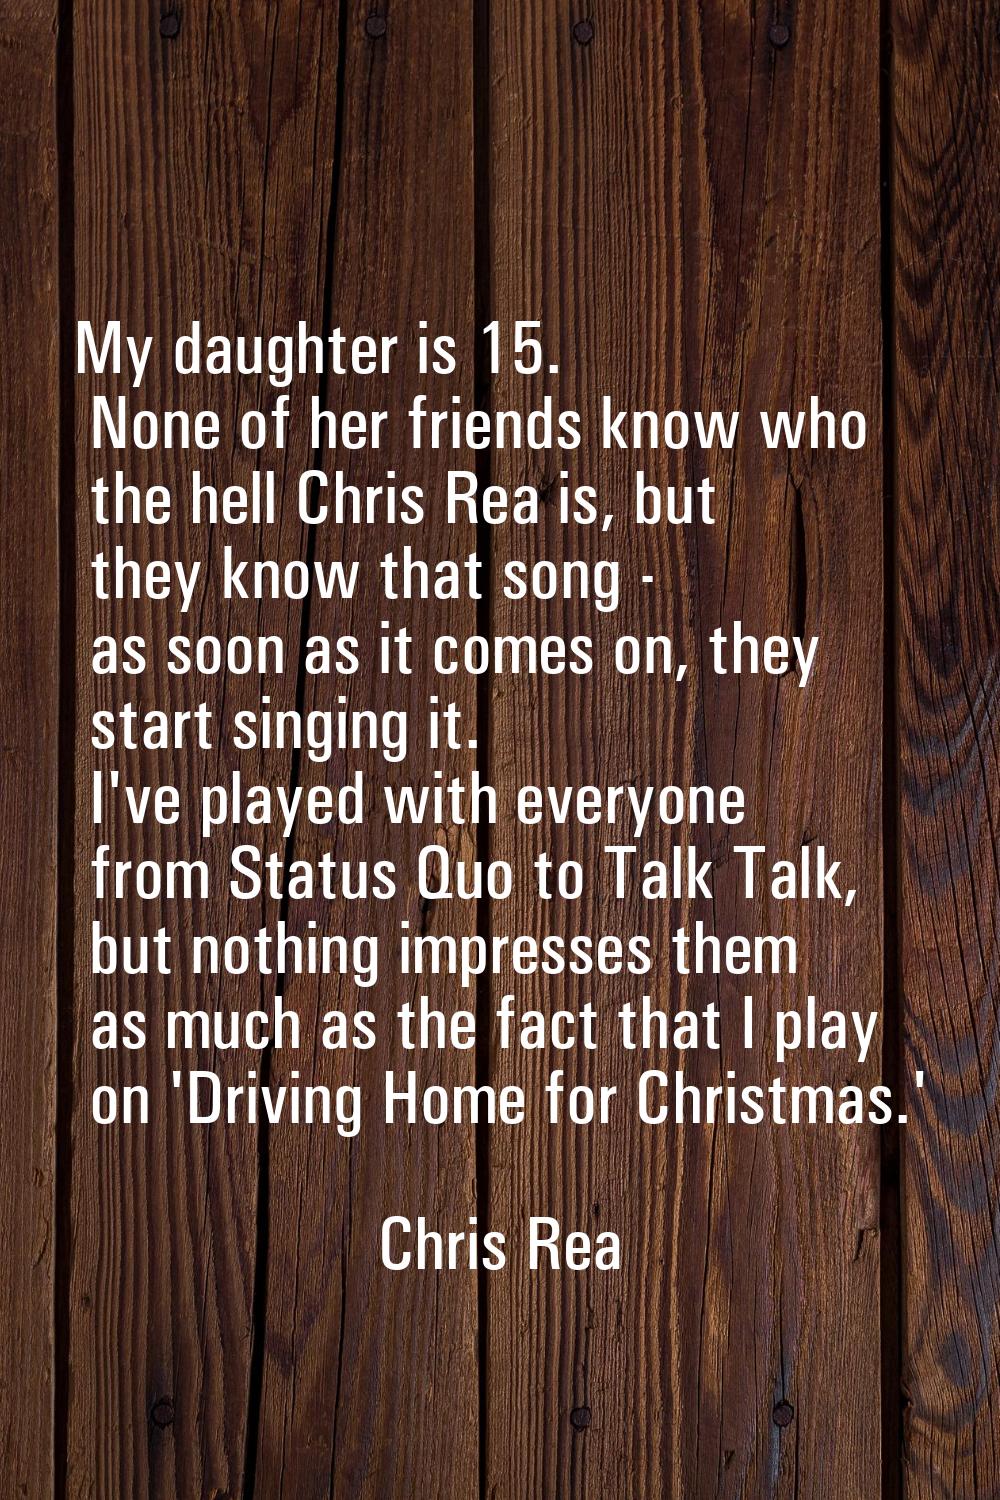 My daughter is 15. None of her friends know who the hell Chris Rea is, but they know that song - as